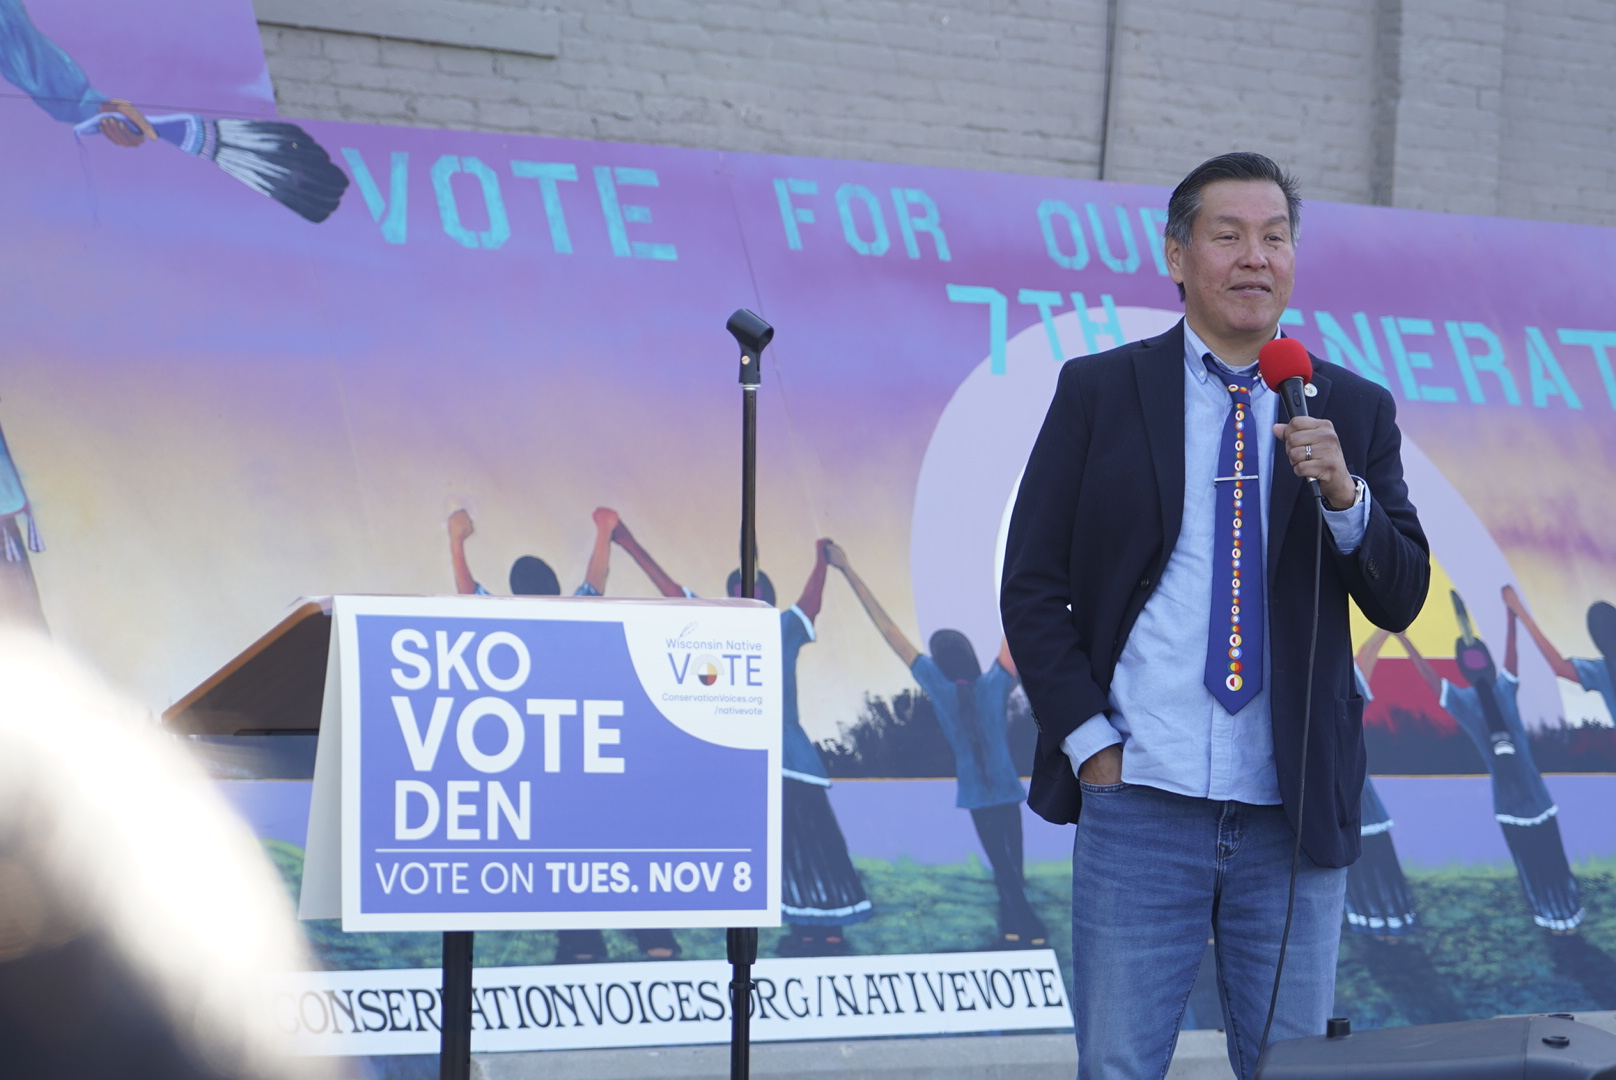 Wisconsin Native Vote hosts Milwaukee mural unveiling to encourage healing and get out the vote